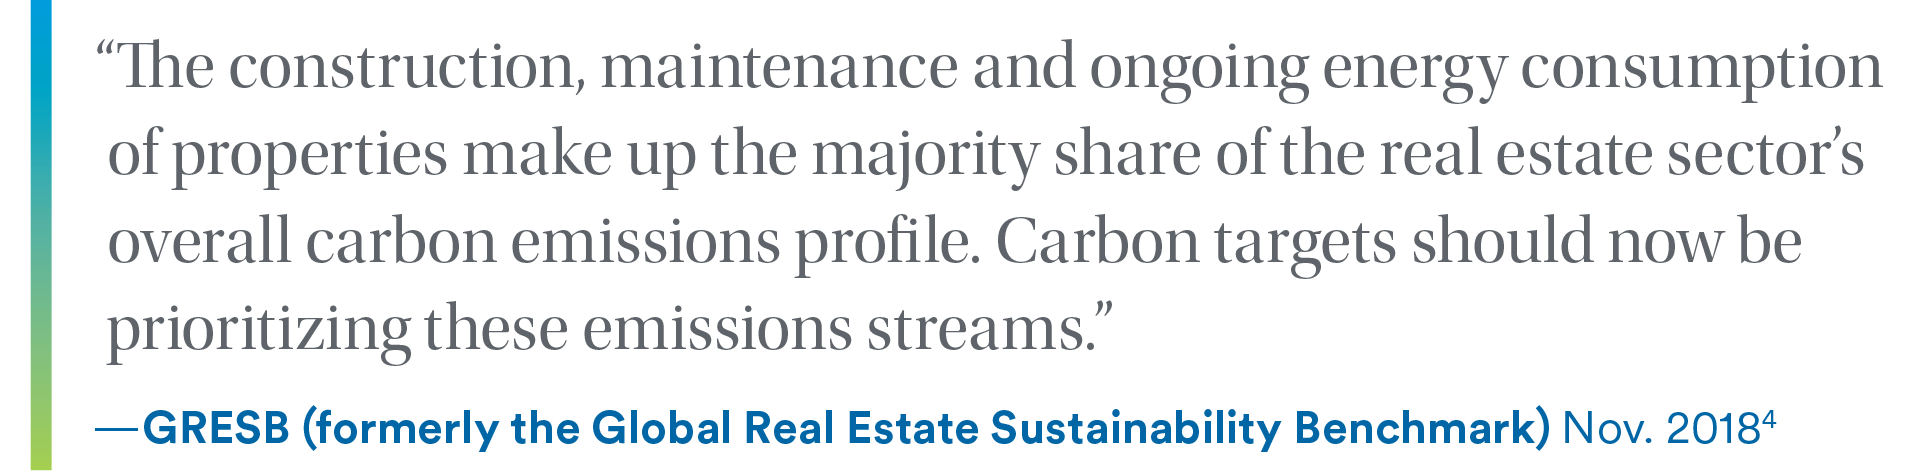 /></figure></p><!-- /wp:image --><!-- wp:paragraph --><p><p>In commercial real estate, a primary Scope 3 source of emissions are the building’s tenants, their activities, and their energy use. In the GHG Protocol, these are covered under category 13, “<a href=